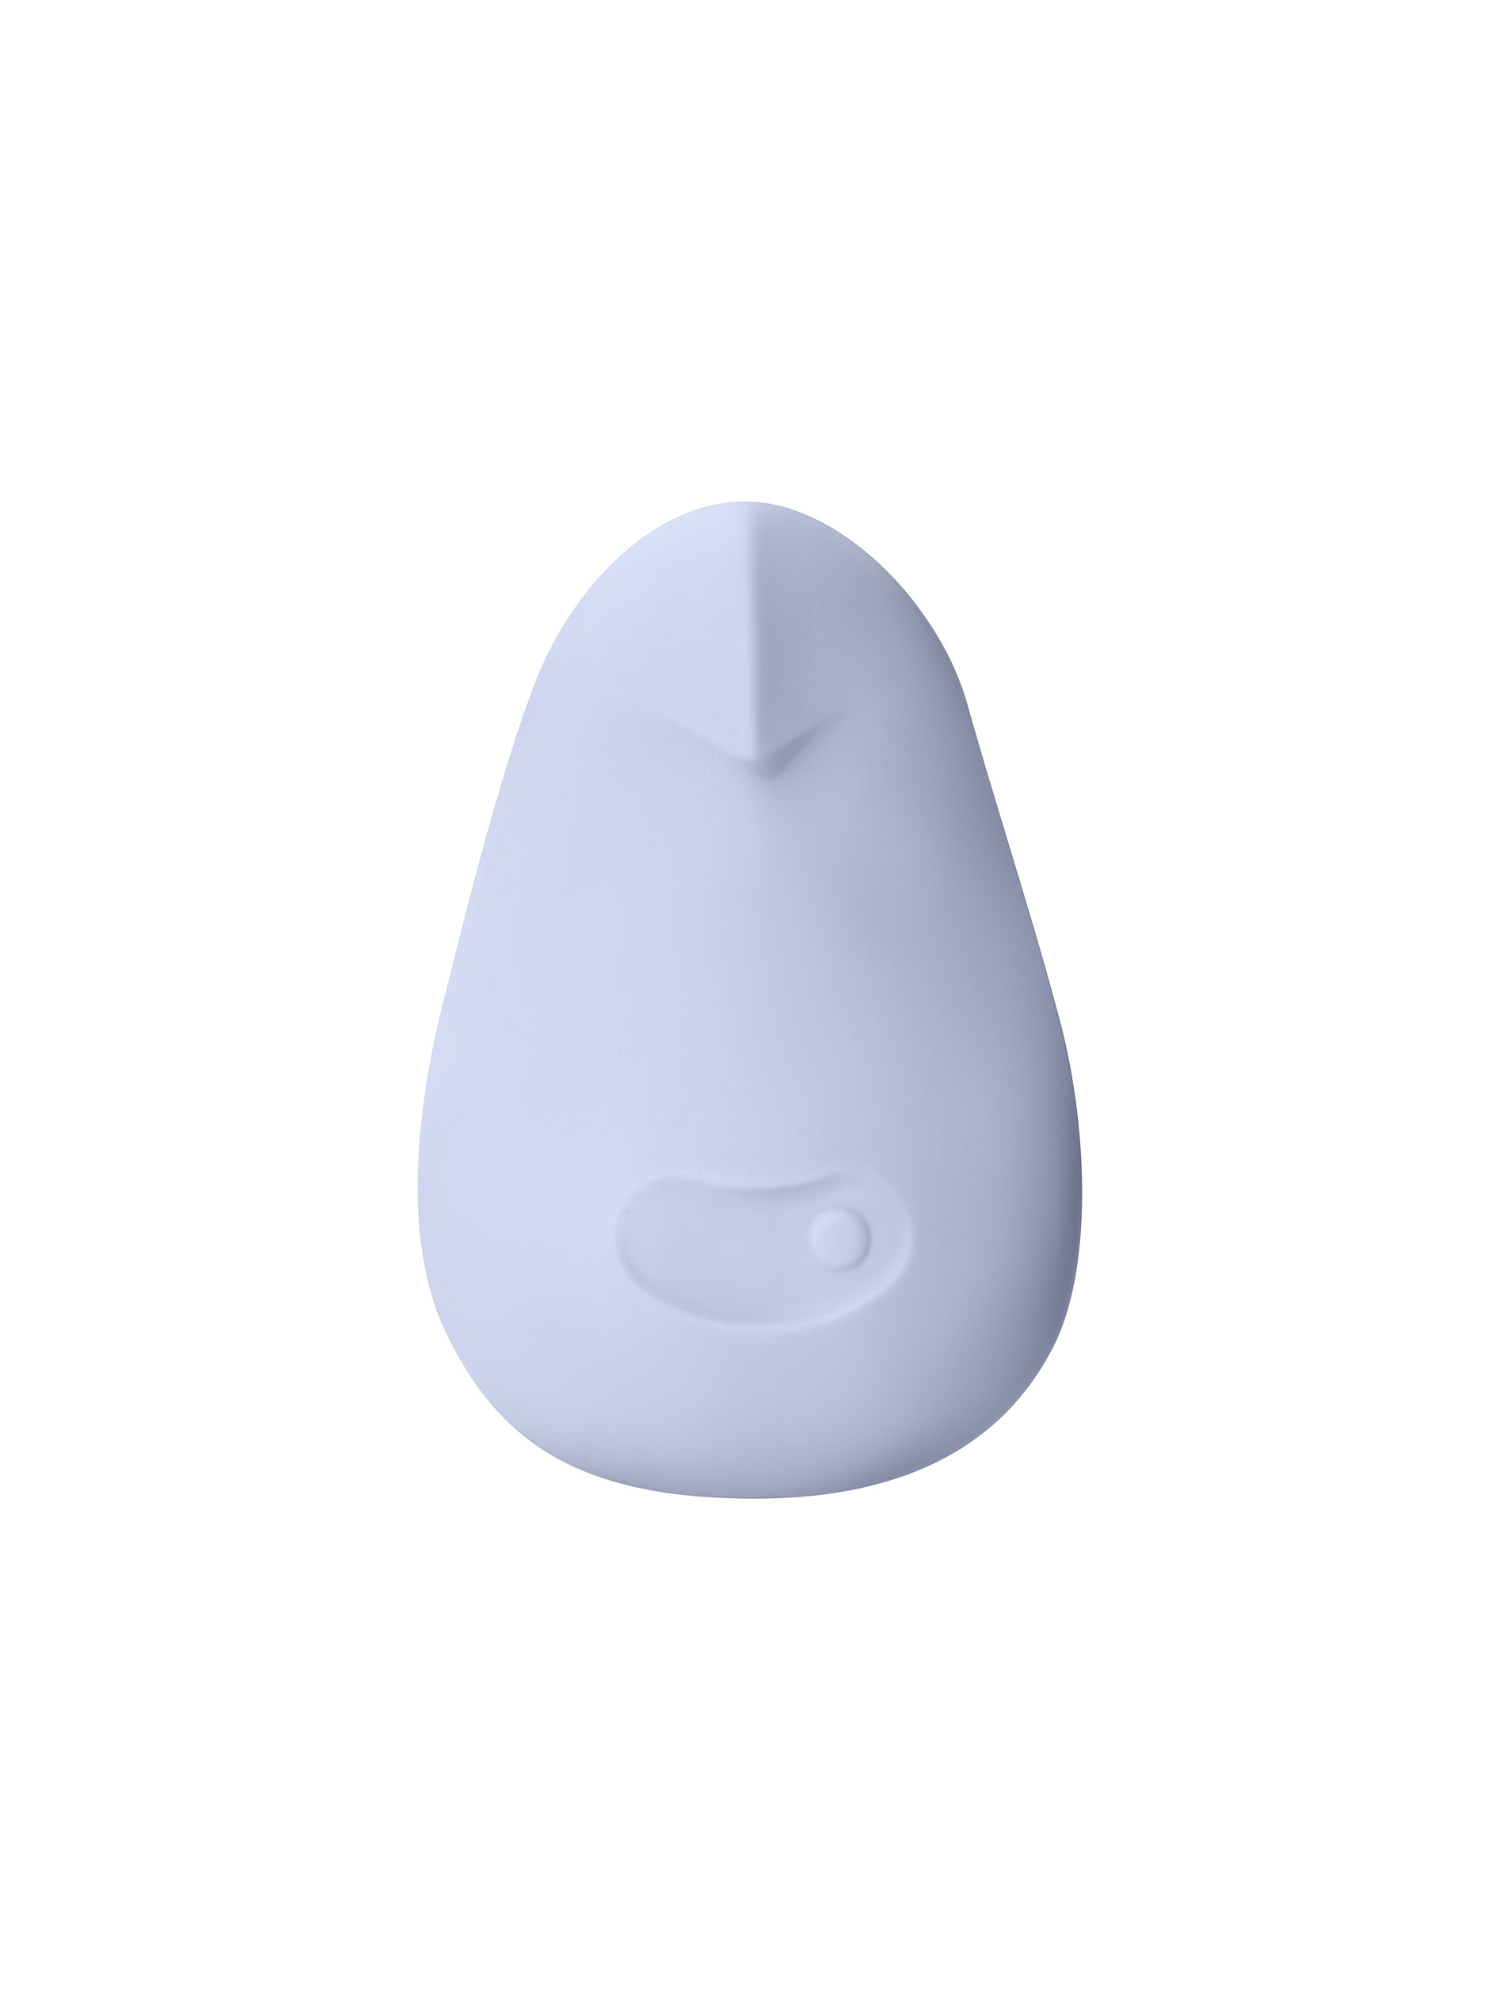 Pom Dame, Vibrator, Berry, Ice,  Nourished, sexual wellness, clit stimulating, waterproof, internal+external, medical grade silicone, 5 patterns, 5 intenties , Flexible Vibrator, sex toy, pleasure, sexual pleasure ,sex, toy, sexual satisfaction, bedroom, vagina, vulva, sex speeltje, flexible, orgasm, medical grade sex toy